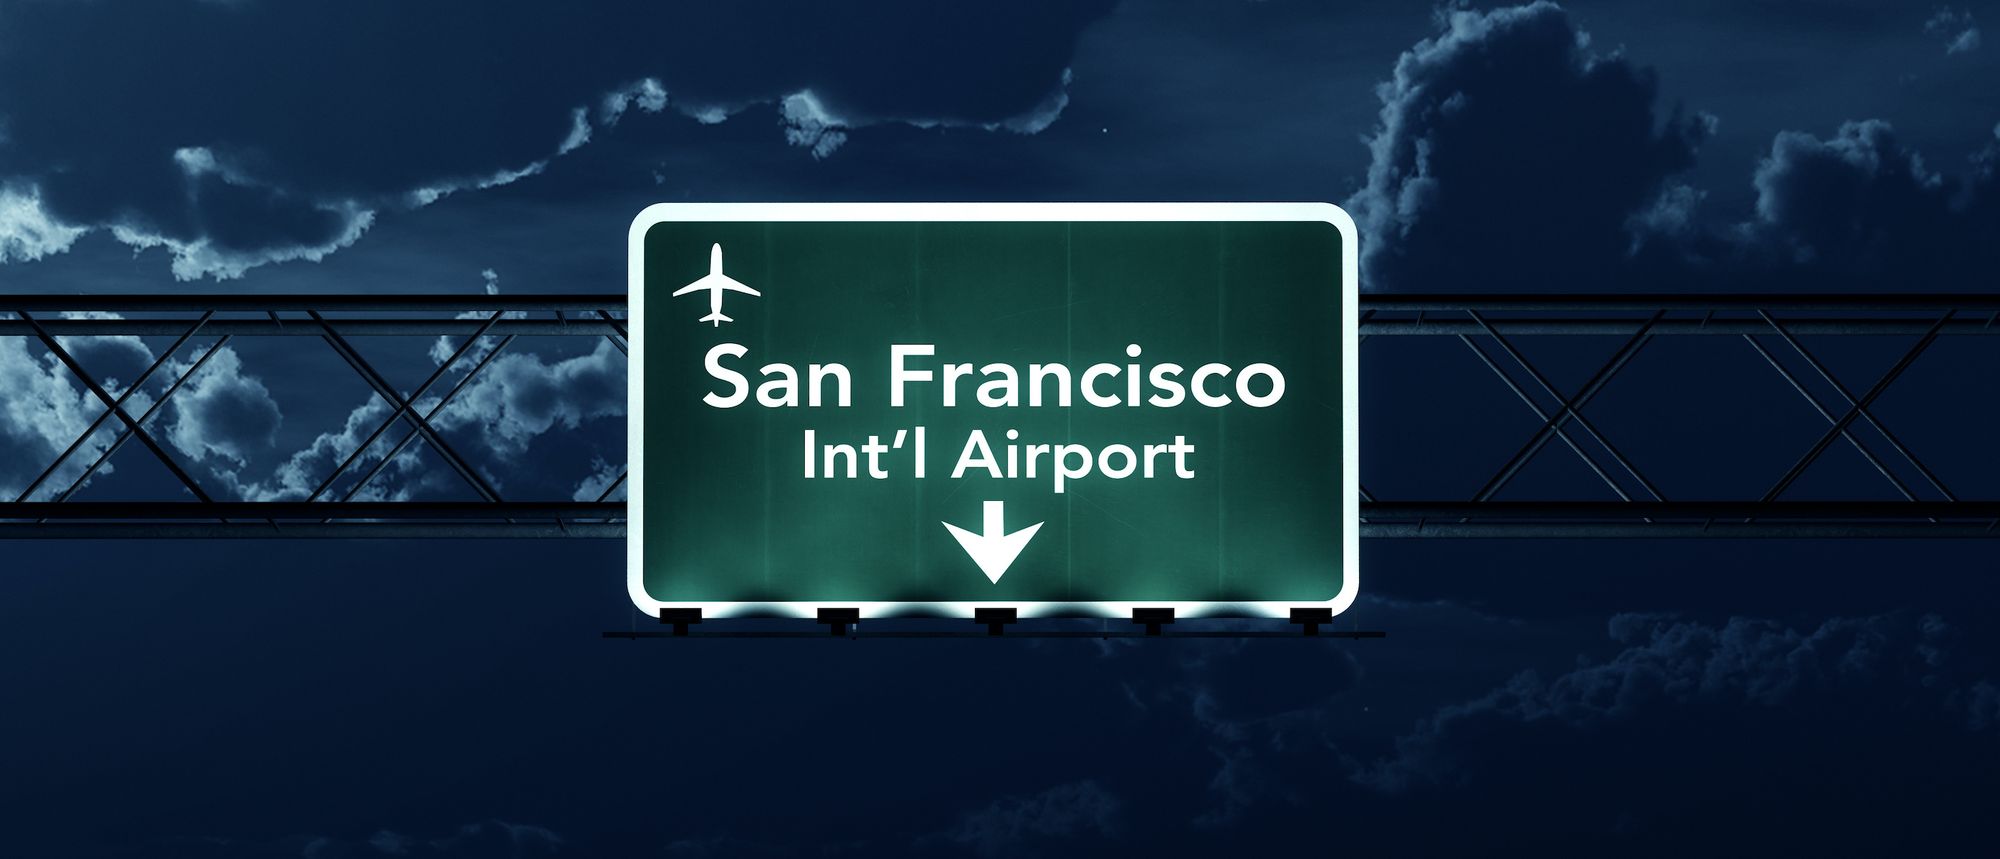 QOMPLX Analysis: SFO Airport Attack Spotlights Credential Theft Scourge